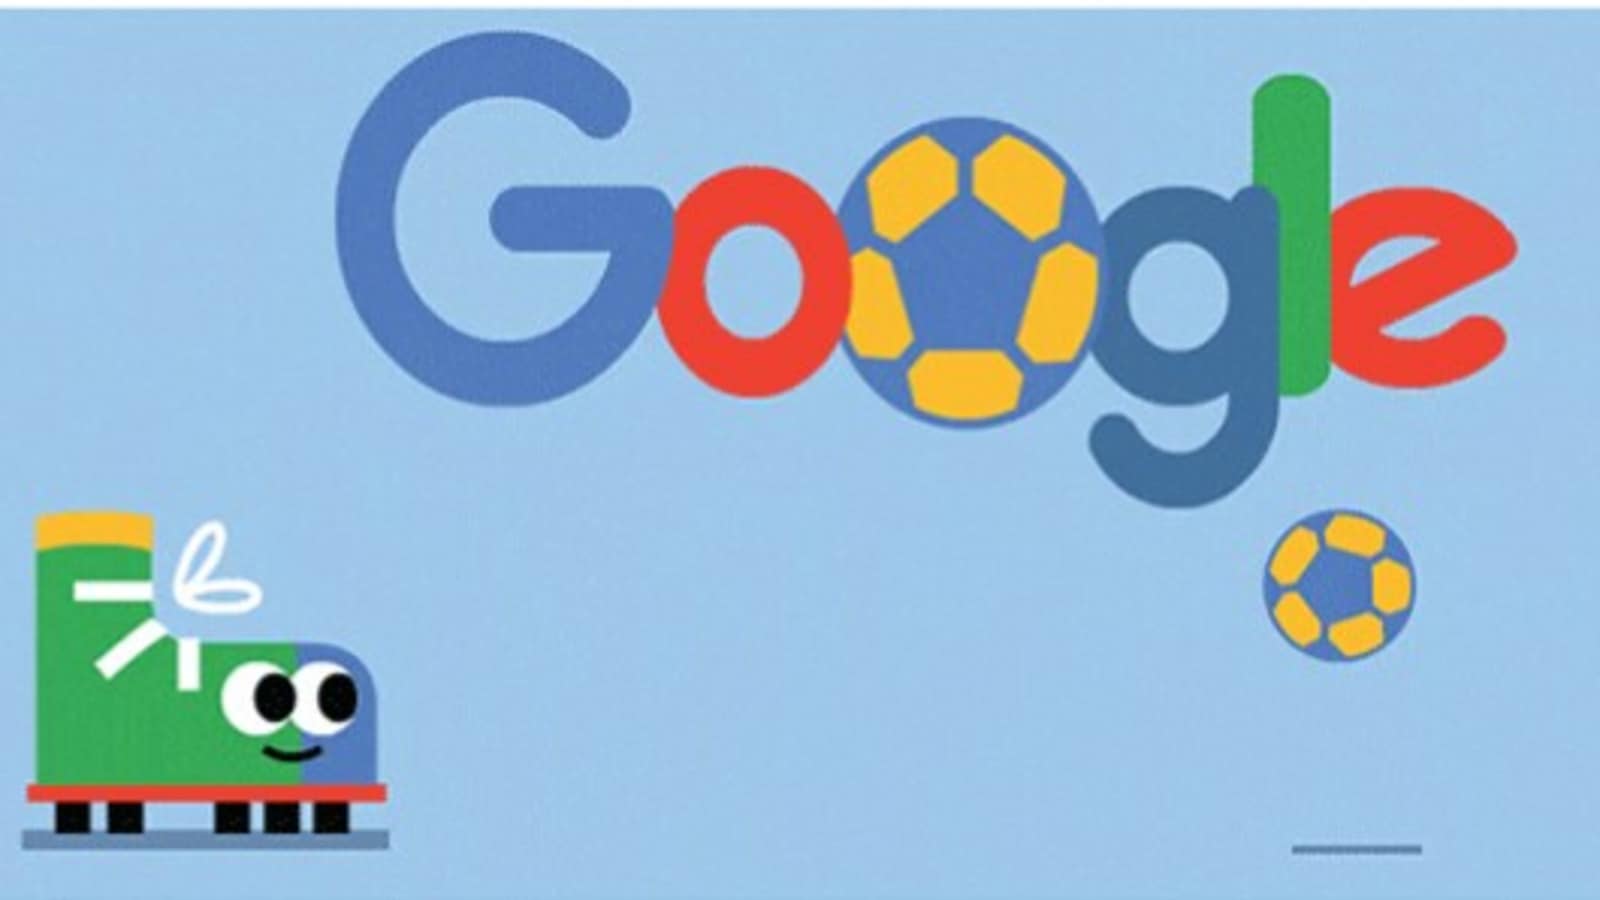 Google Doodle today celebrates FIFA World Cup; you can play online game too